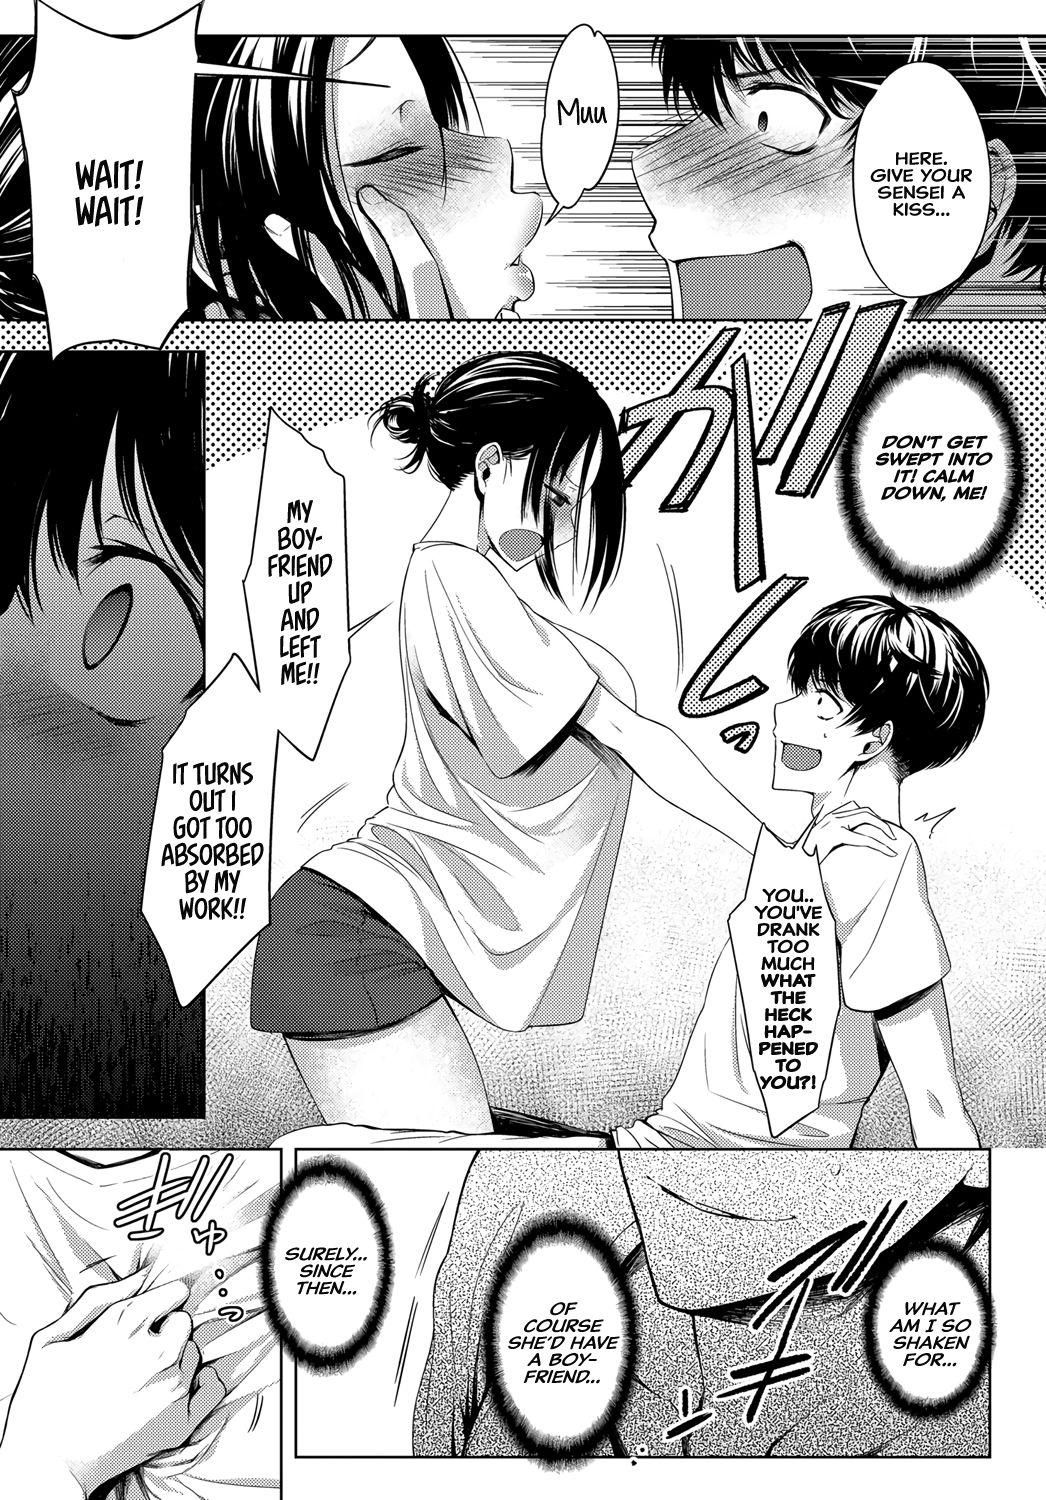 Hogtied 5nenme no houkago | 5th Year After School Public Nudity - Page 7